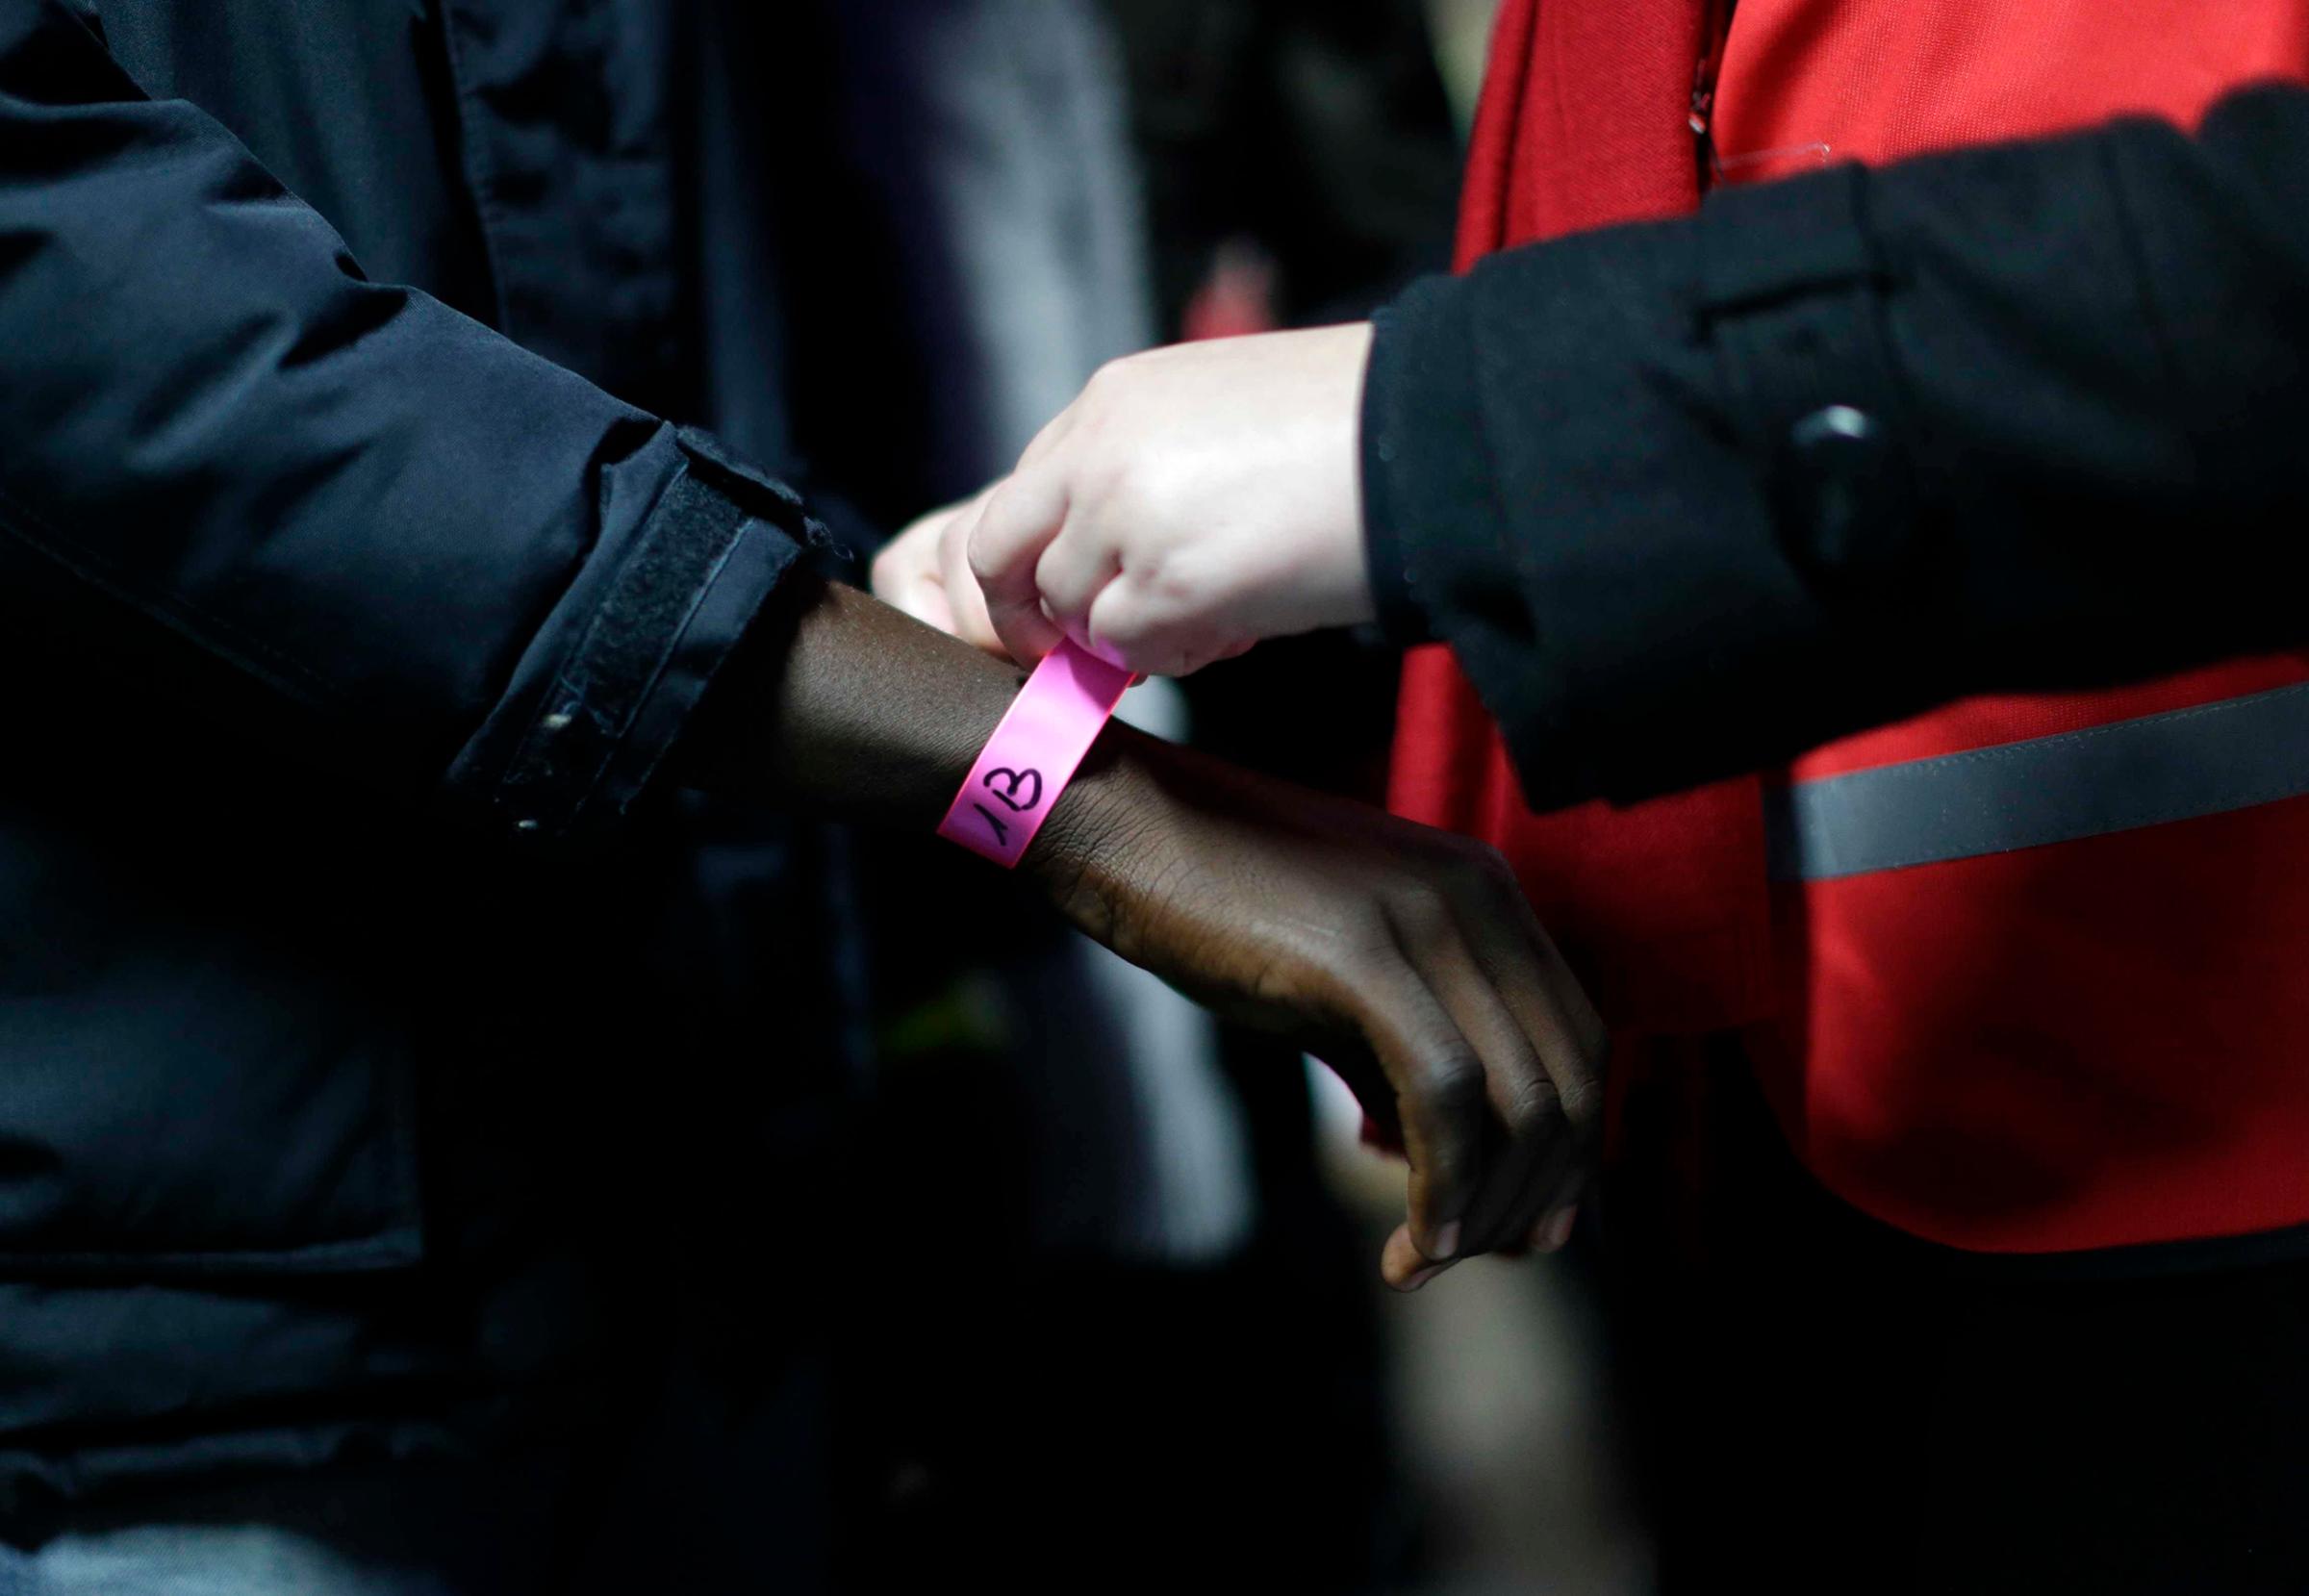 A wristband is attached to a migrant at a processing center in the makeshift migrant camp known as "the Jungle," near Calais, northern France, on Oct. 24, 2016.